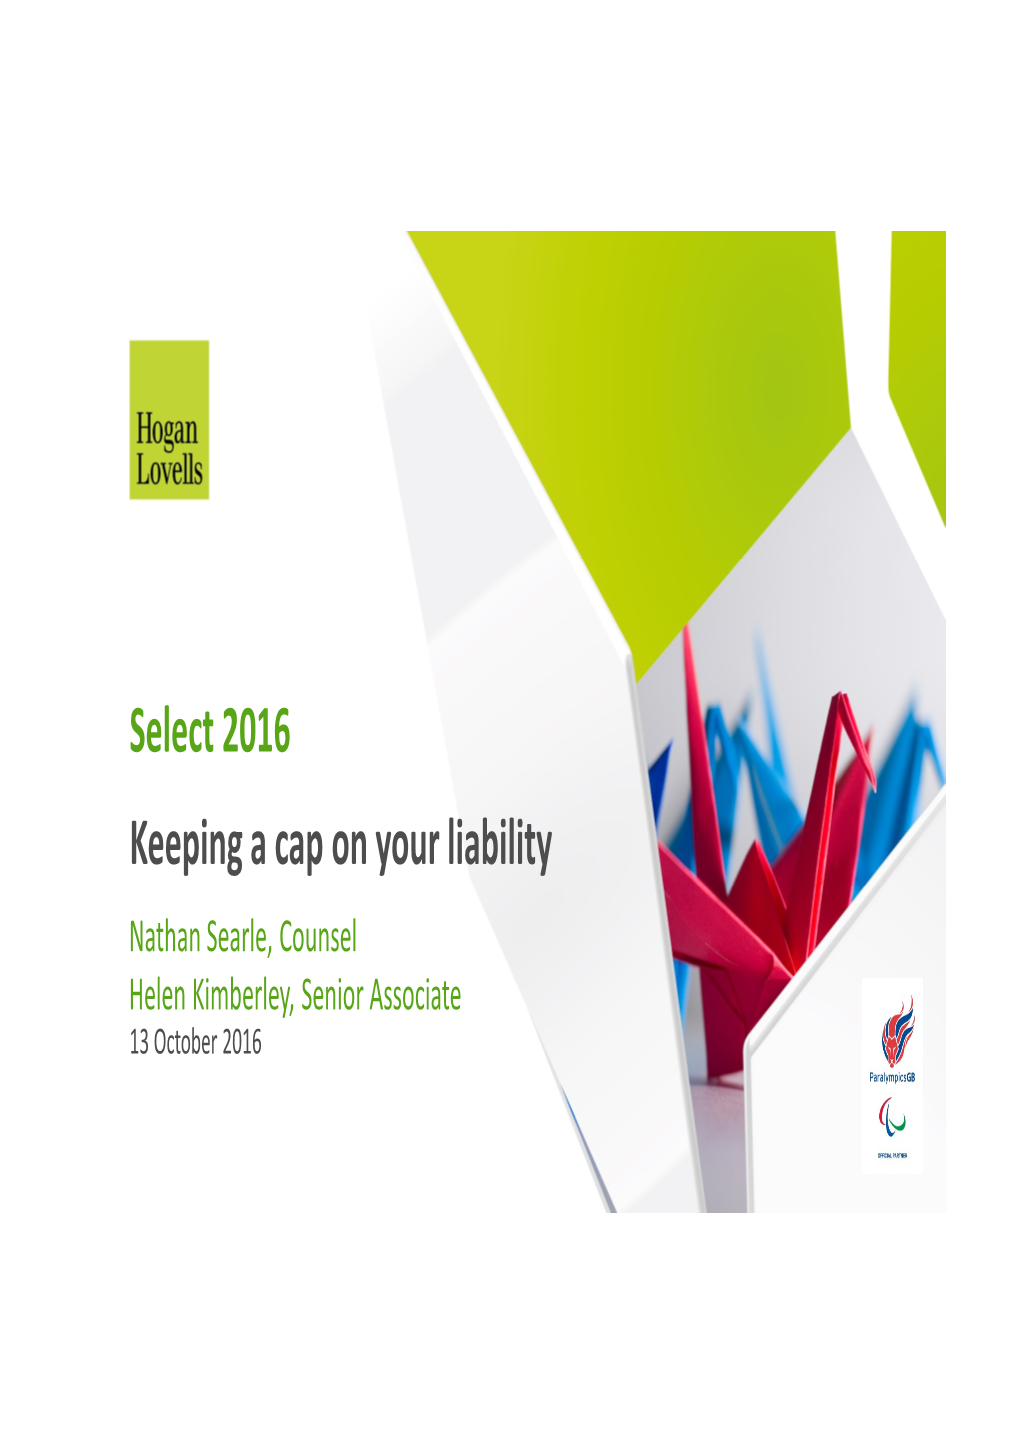 Select 2016 Keeping a Cap on Your Liability Nathan Searle, Counsel Helen Kimberley, Senior Associate 13 October 2016 Overview